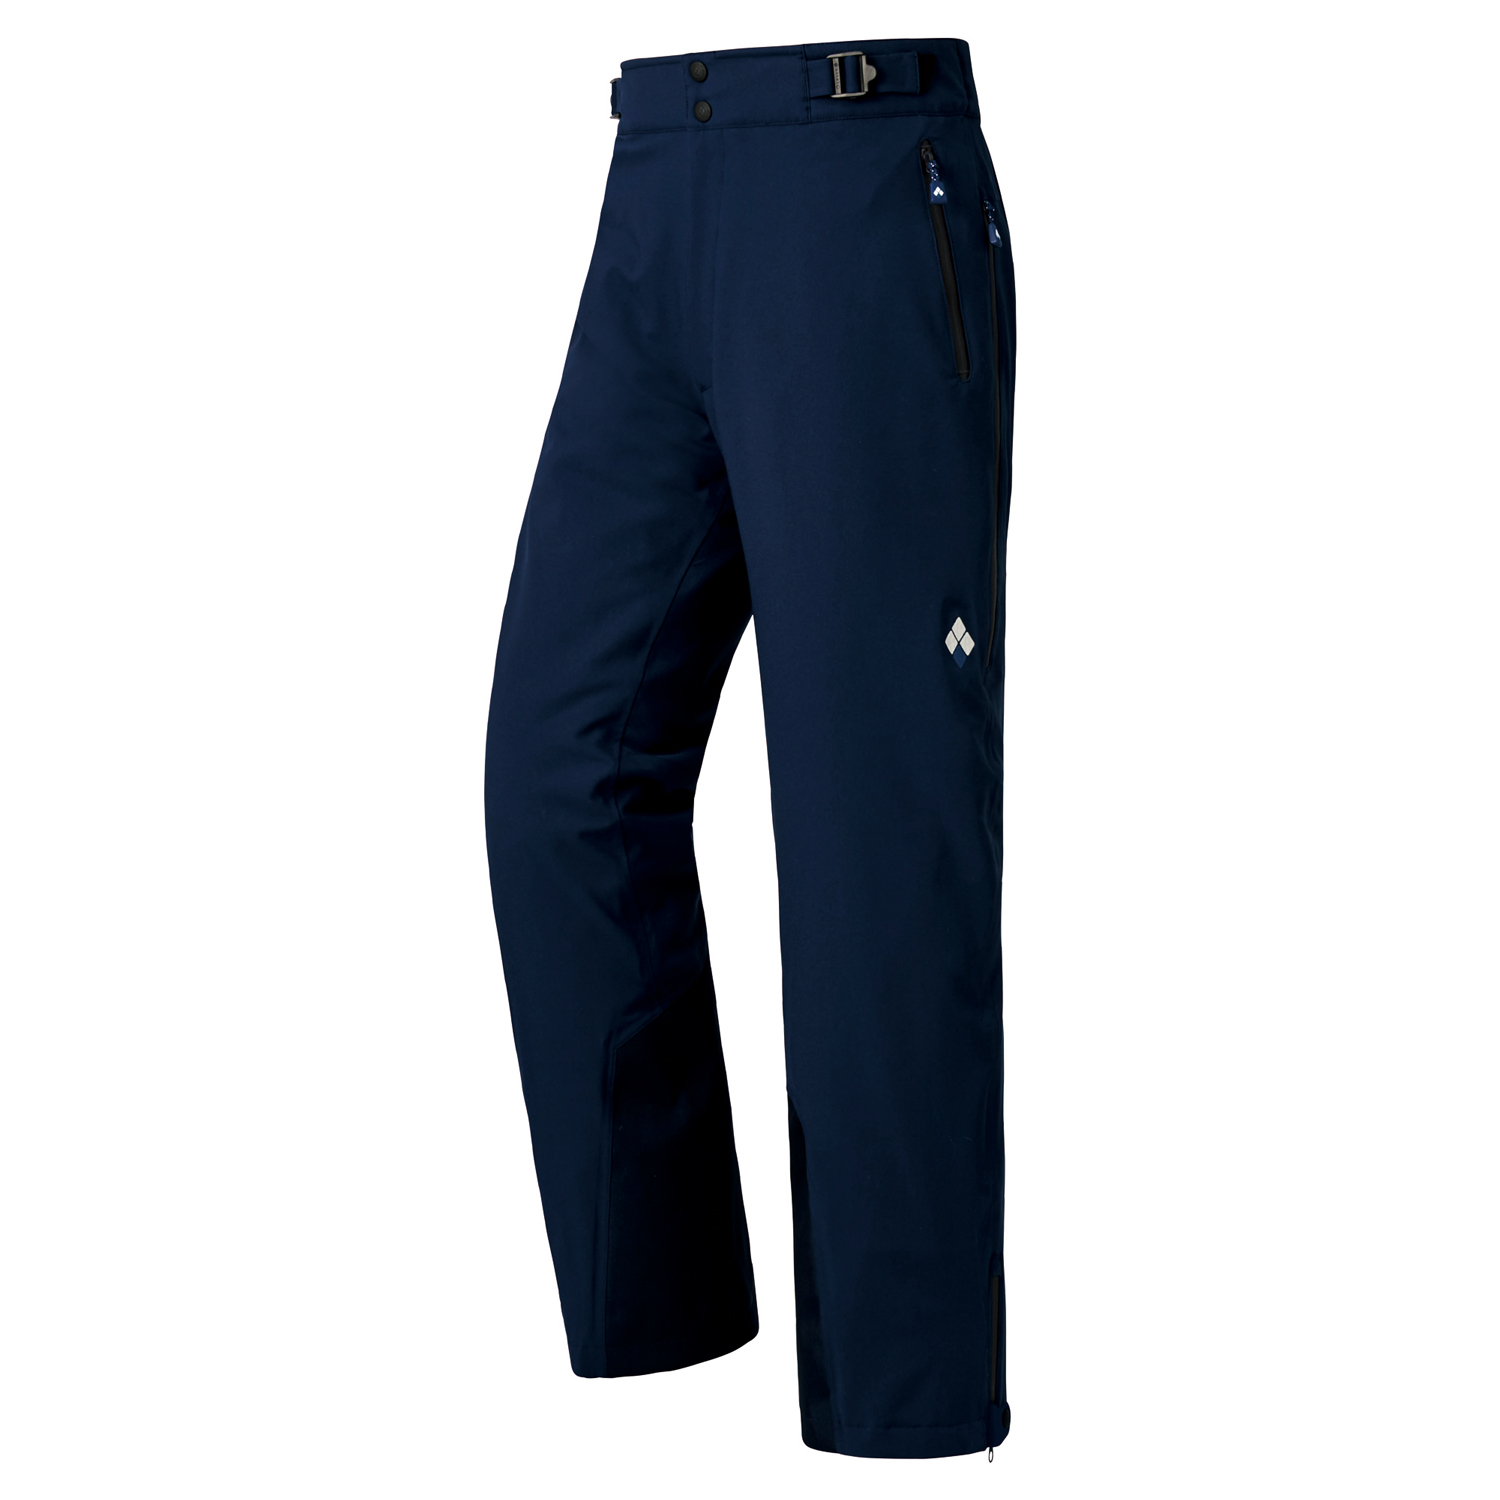 DRY-TEC Insulated Pants Men's | Montbell Euro